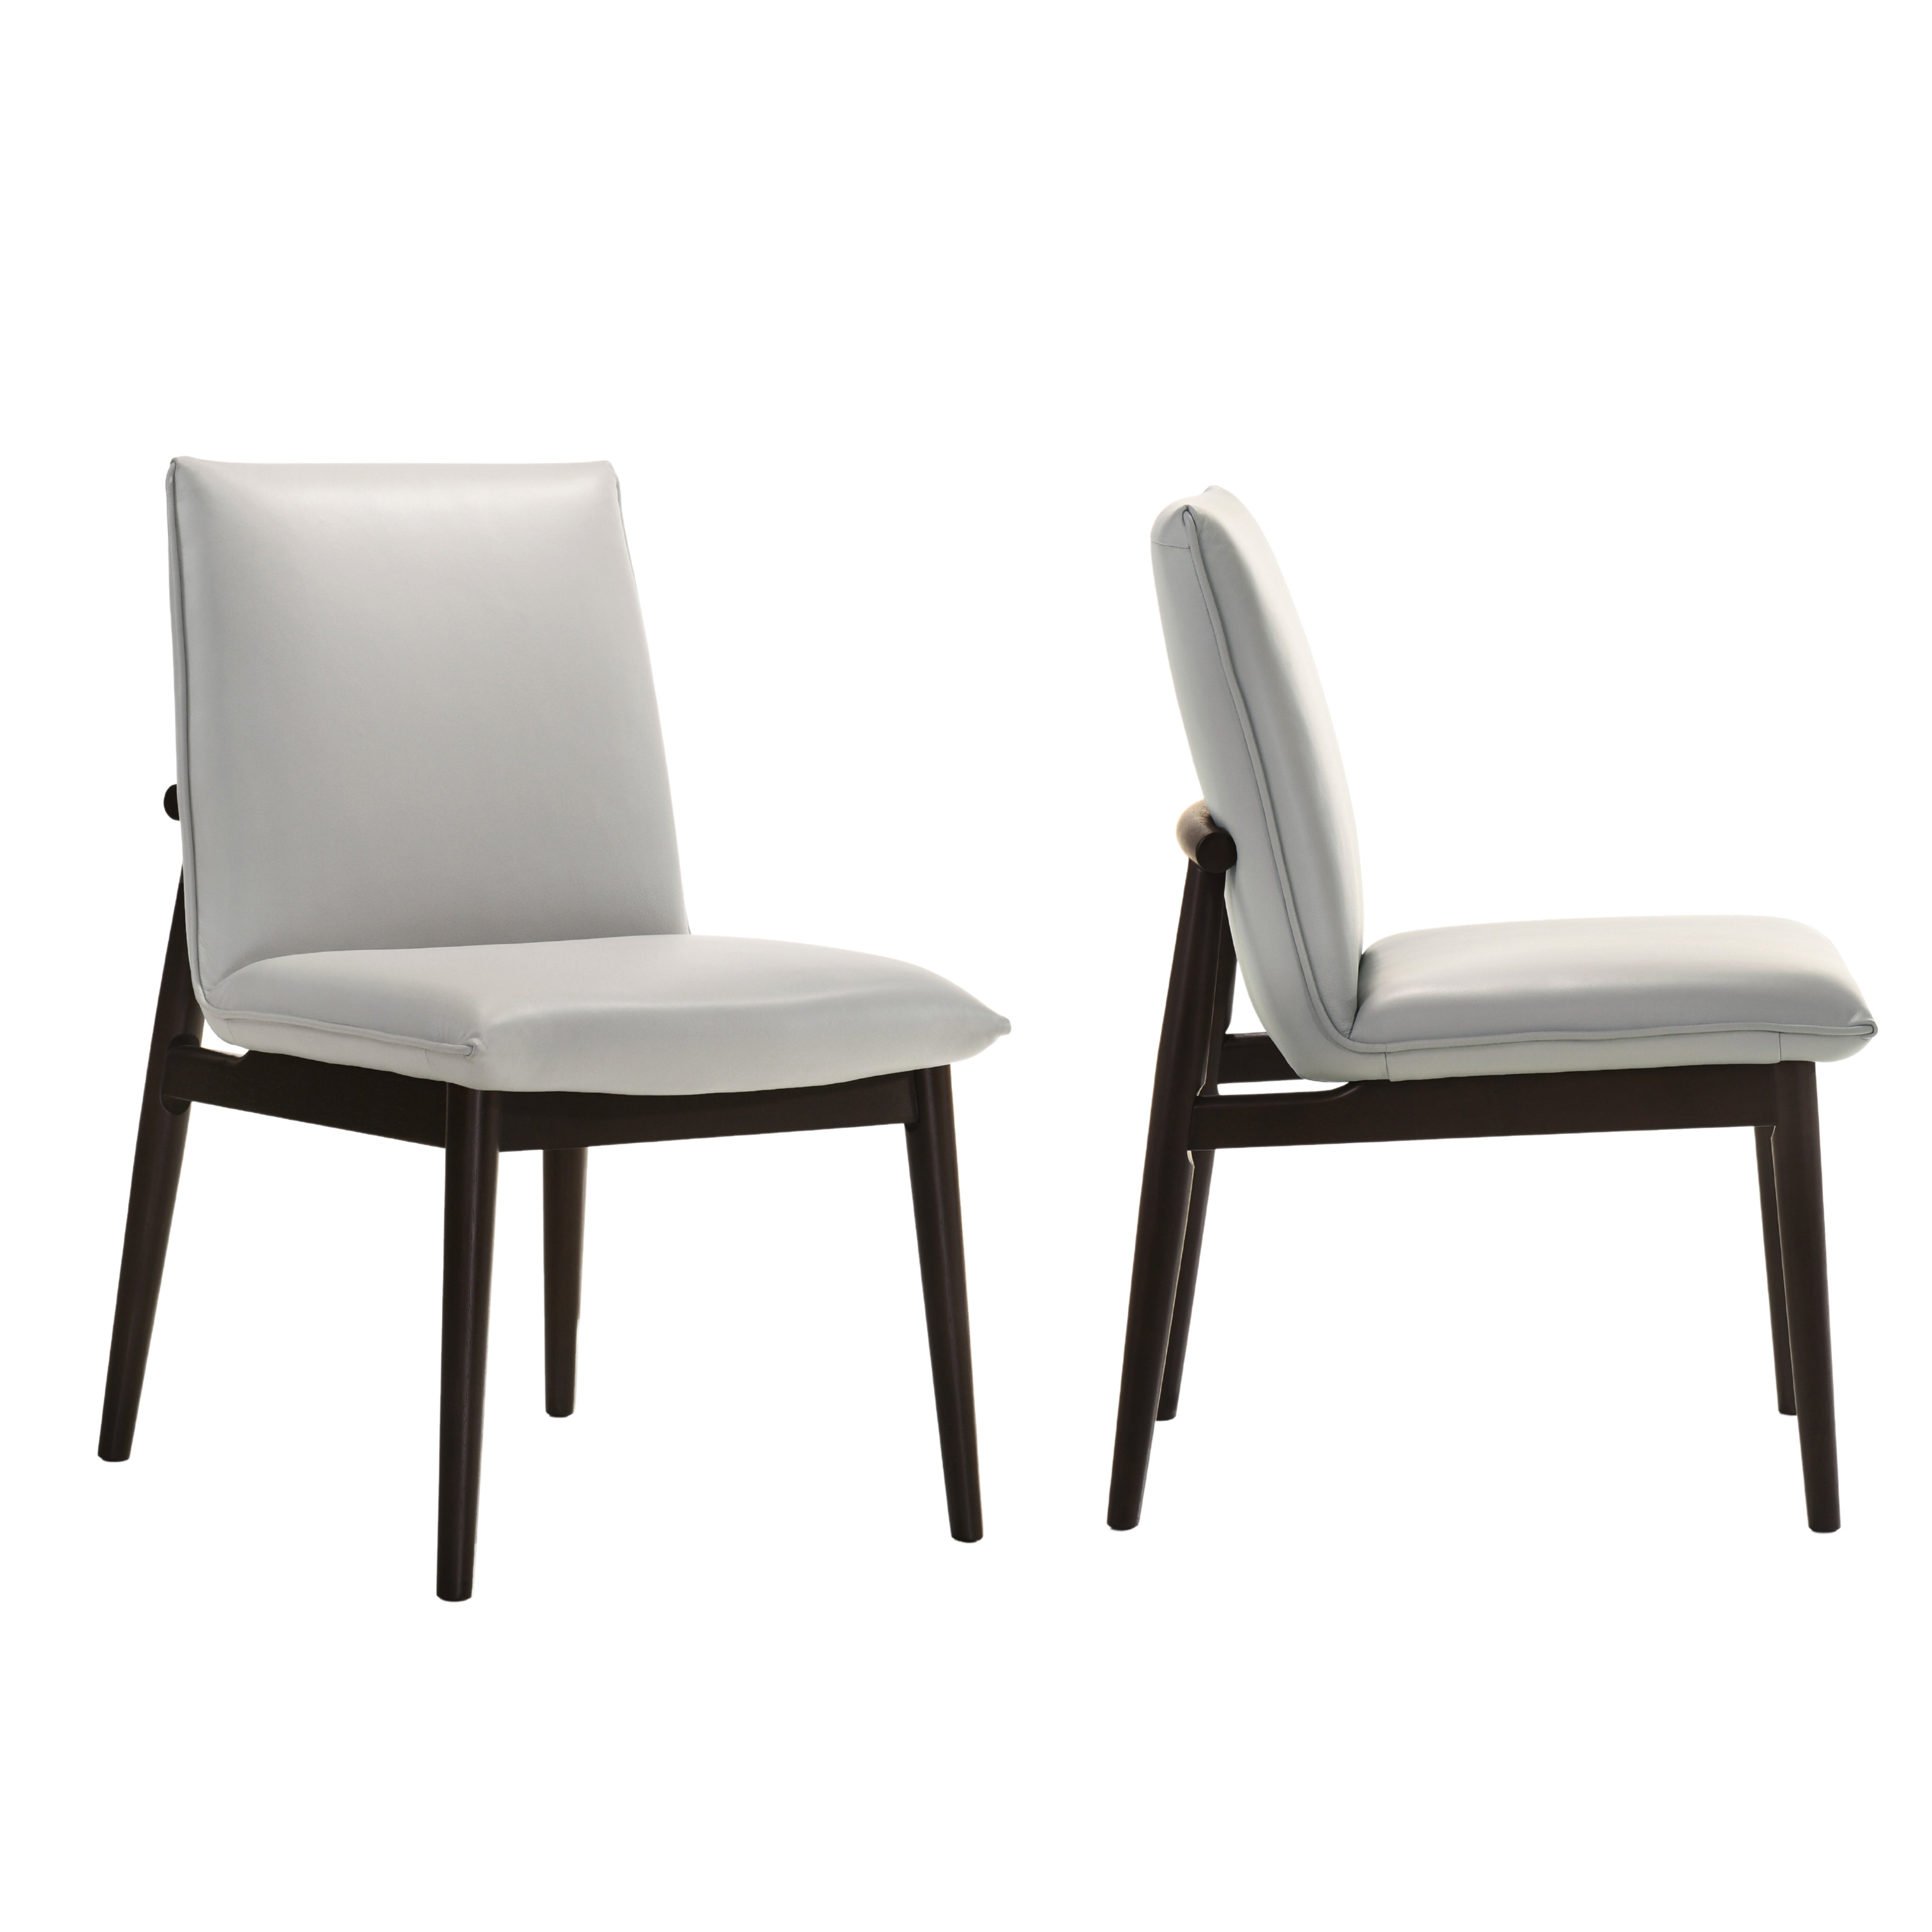 Jean Solid Wood Full Leather Dining Chairs, Light Gray (Set of 2)